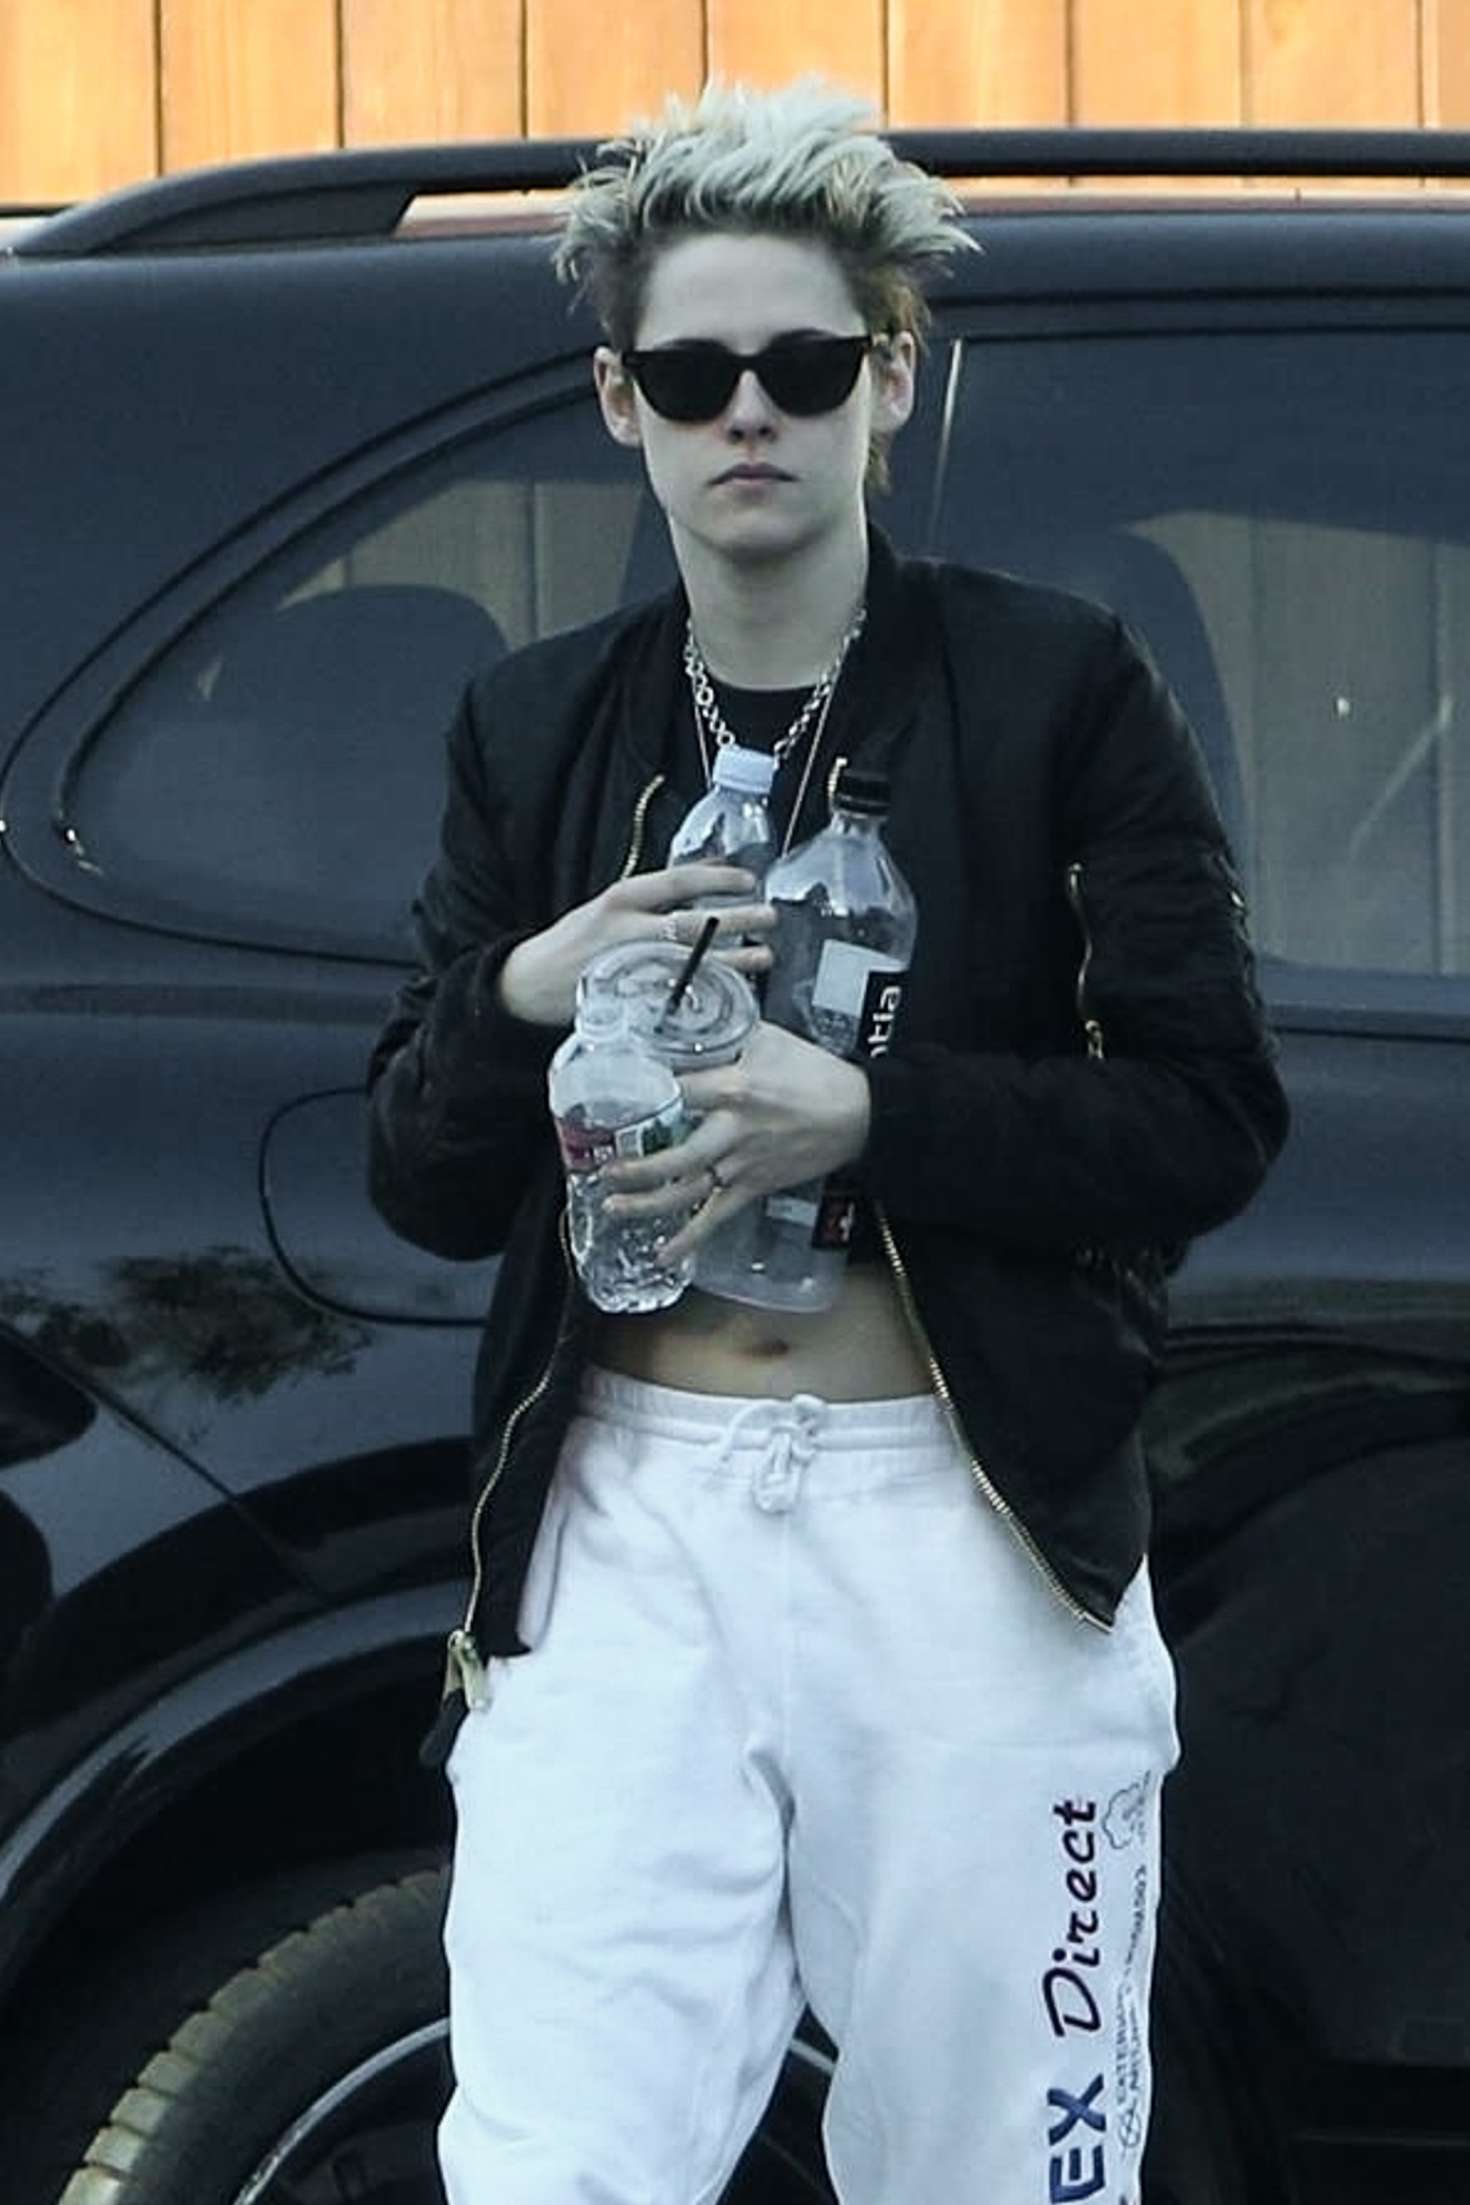 Kristen Stewart and Sarah Dinkin â€“ Out for lunch in Los Angeles